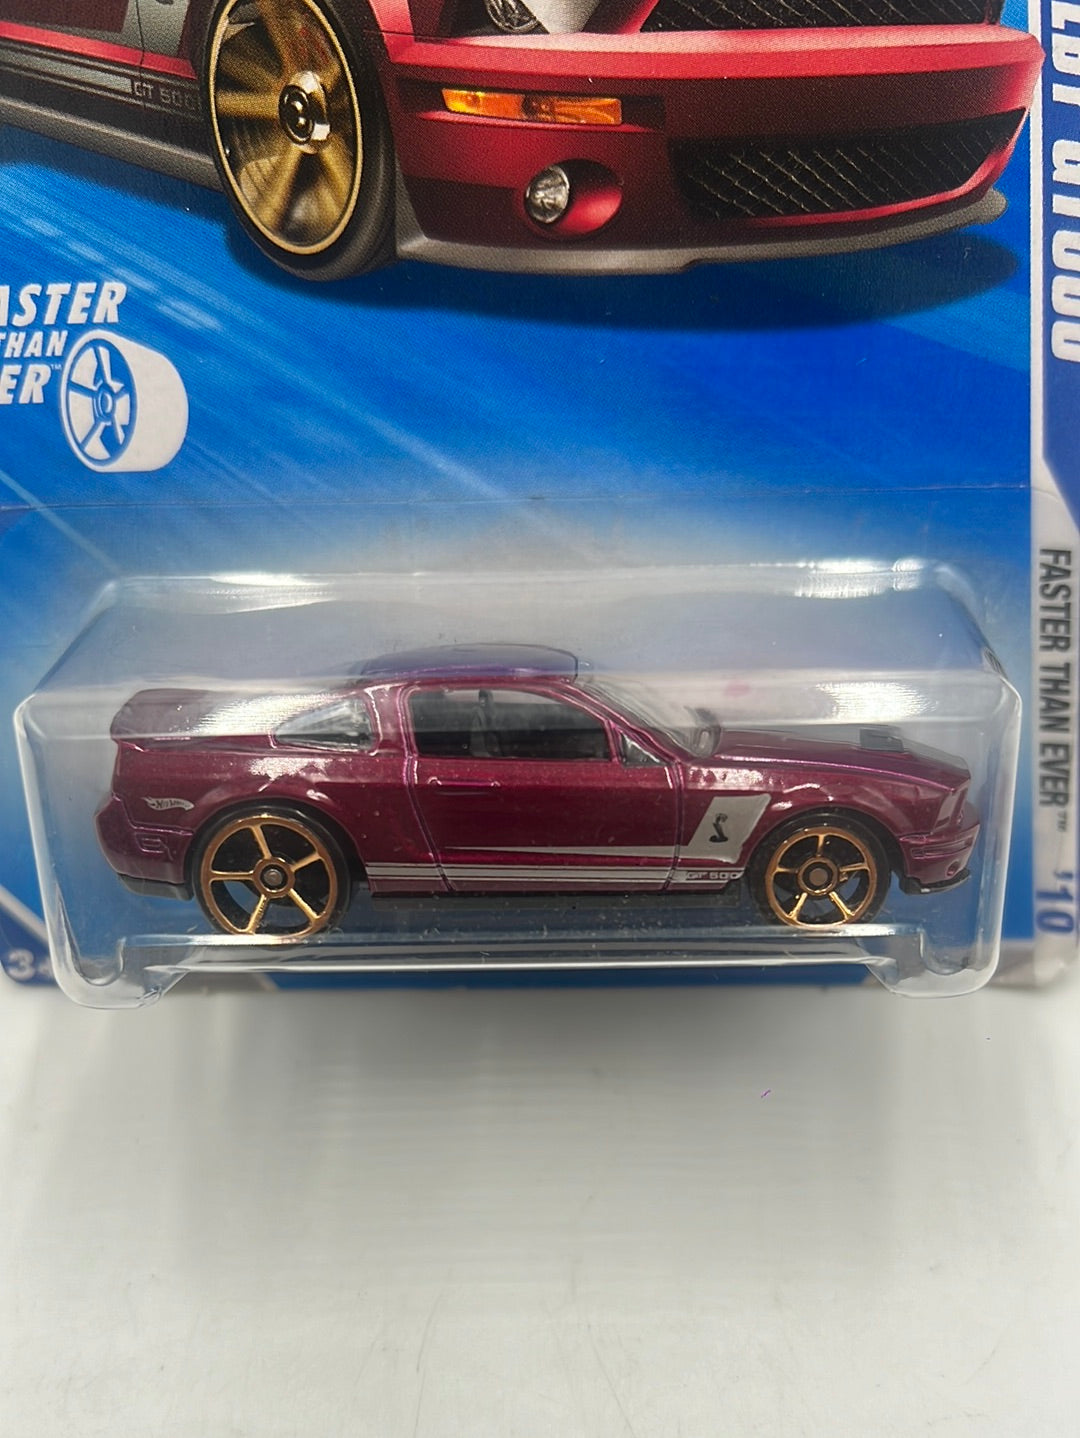 2010 Hot Wheels Faster Than Ever ‘07 Ford Shelby GT500 Maroon 138/240 26G